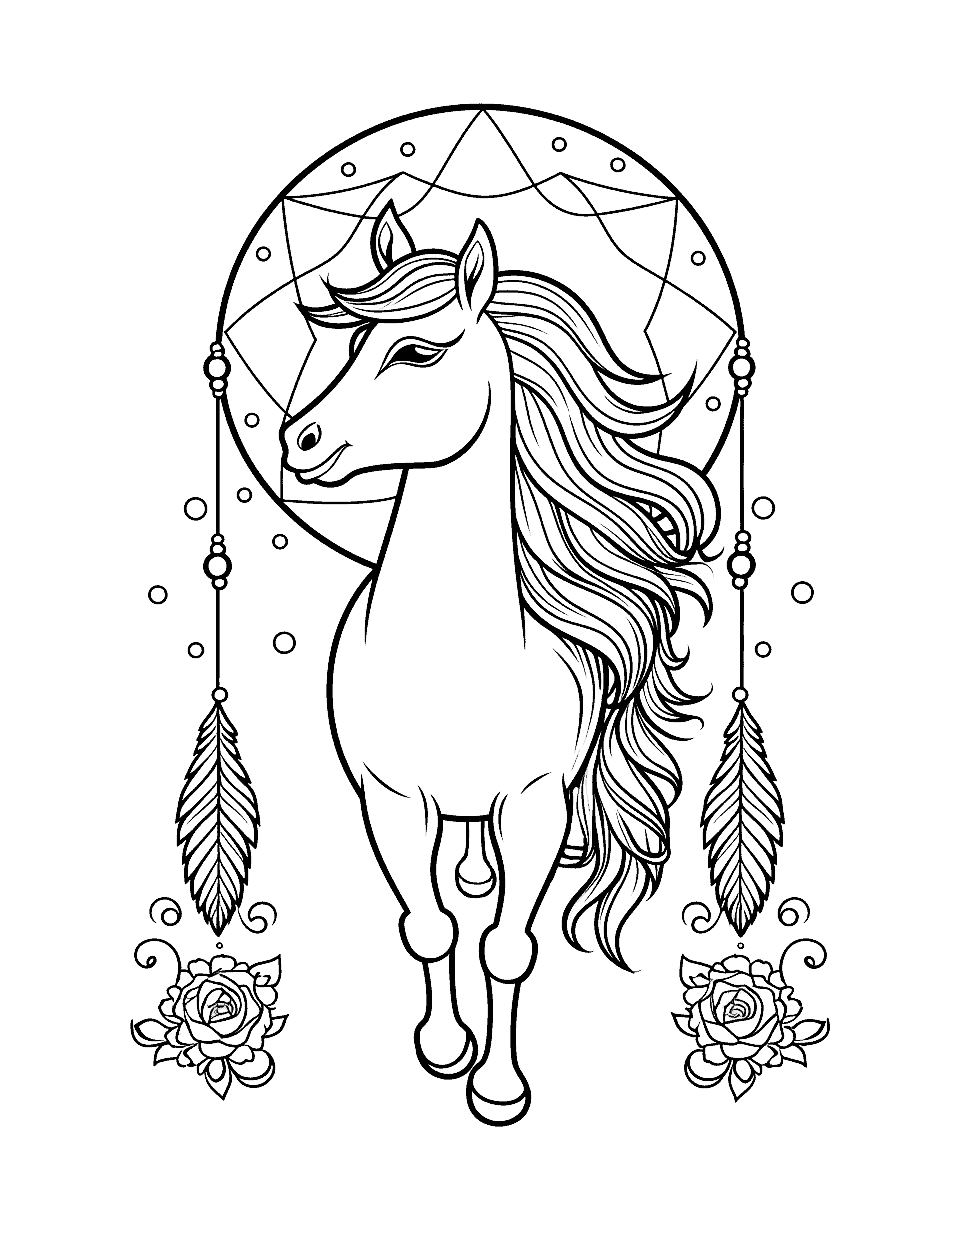 Unicorn Dreamcatcher Coloring Page - A detailed dreamcatcher design with a unicorn in the center, surrounded by feathers and beads.